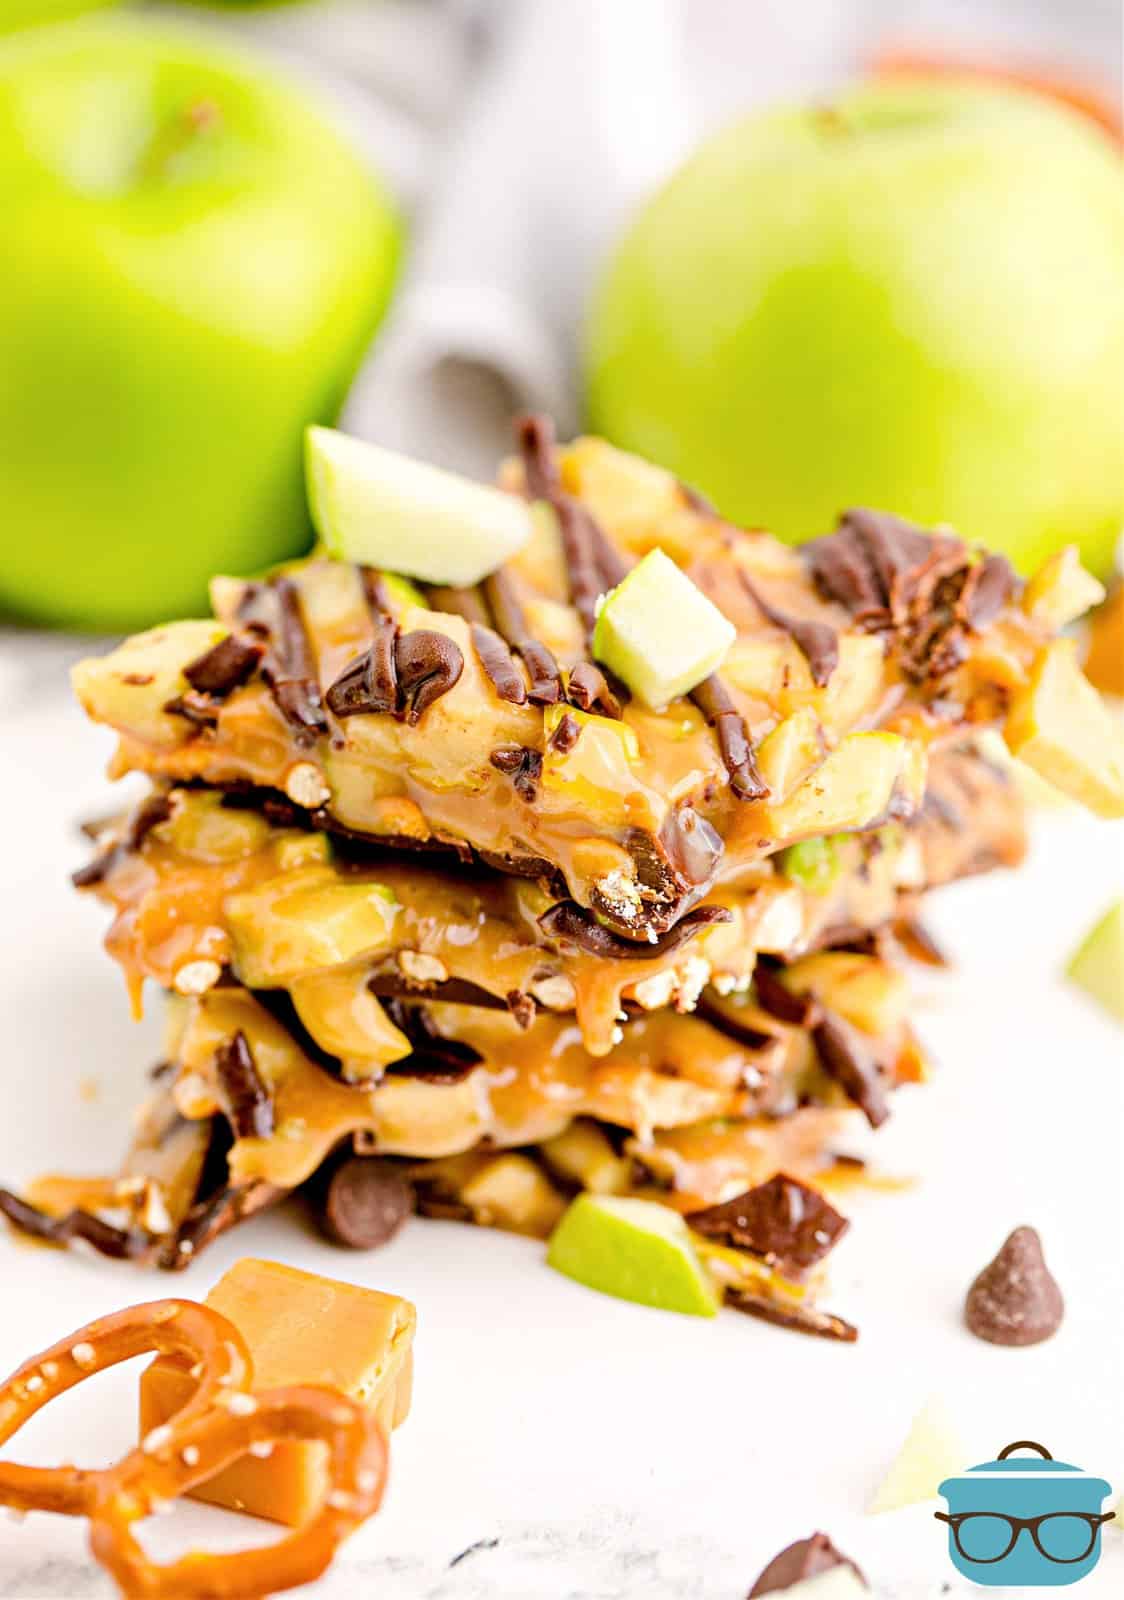 Stacked slices of the Caramel Apple Bark.